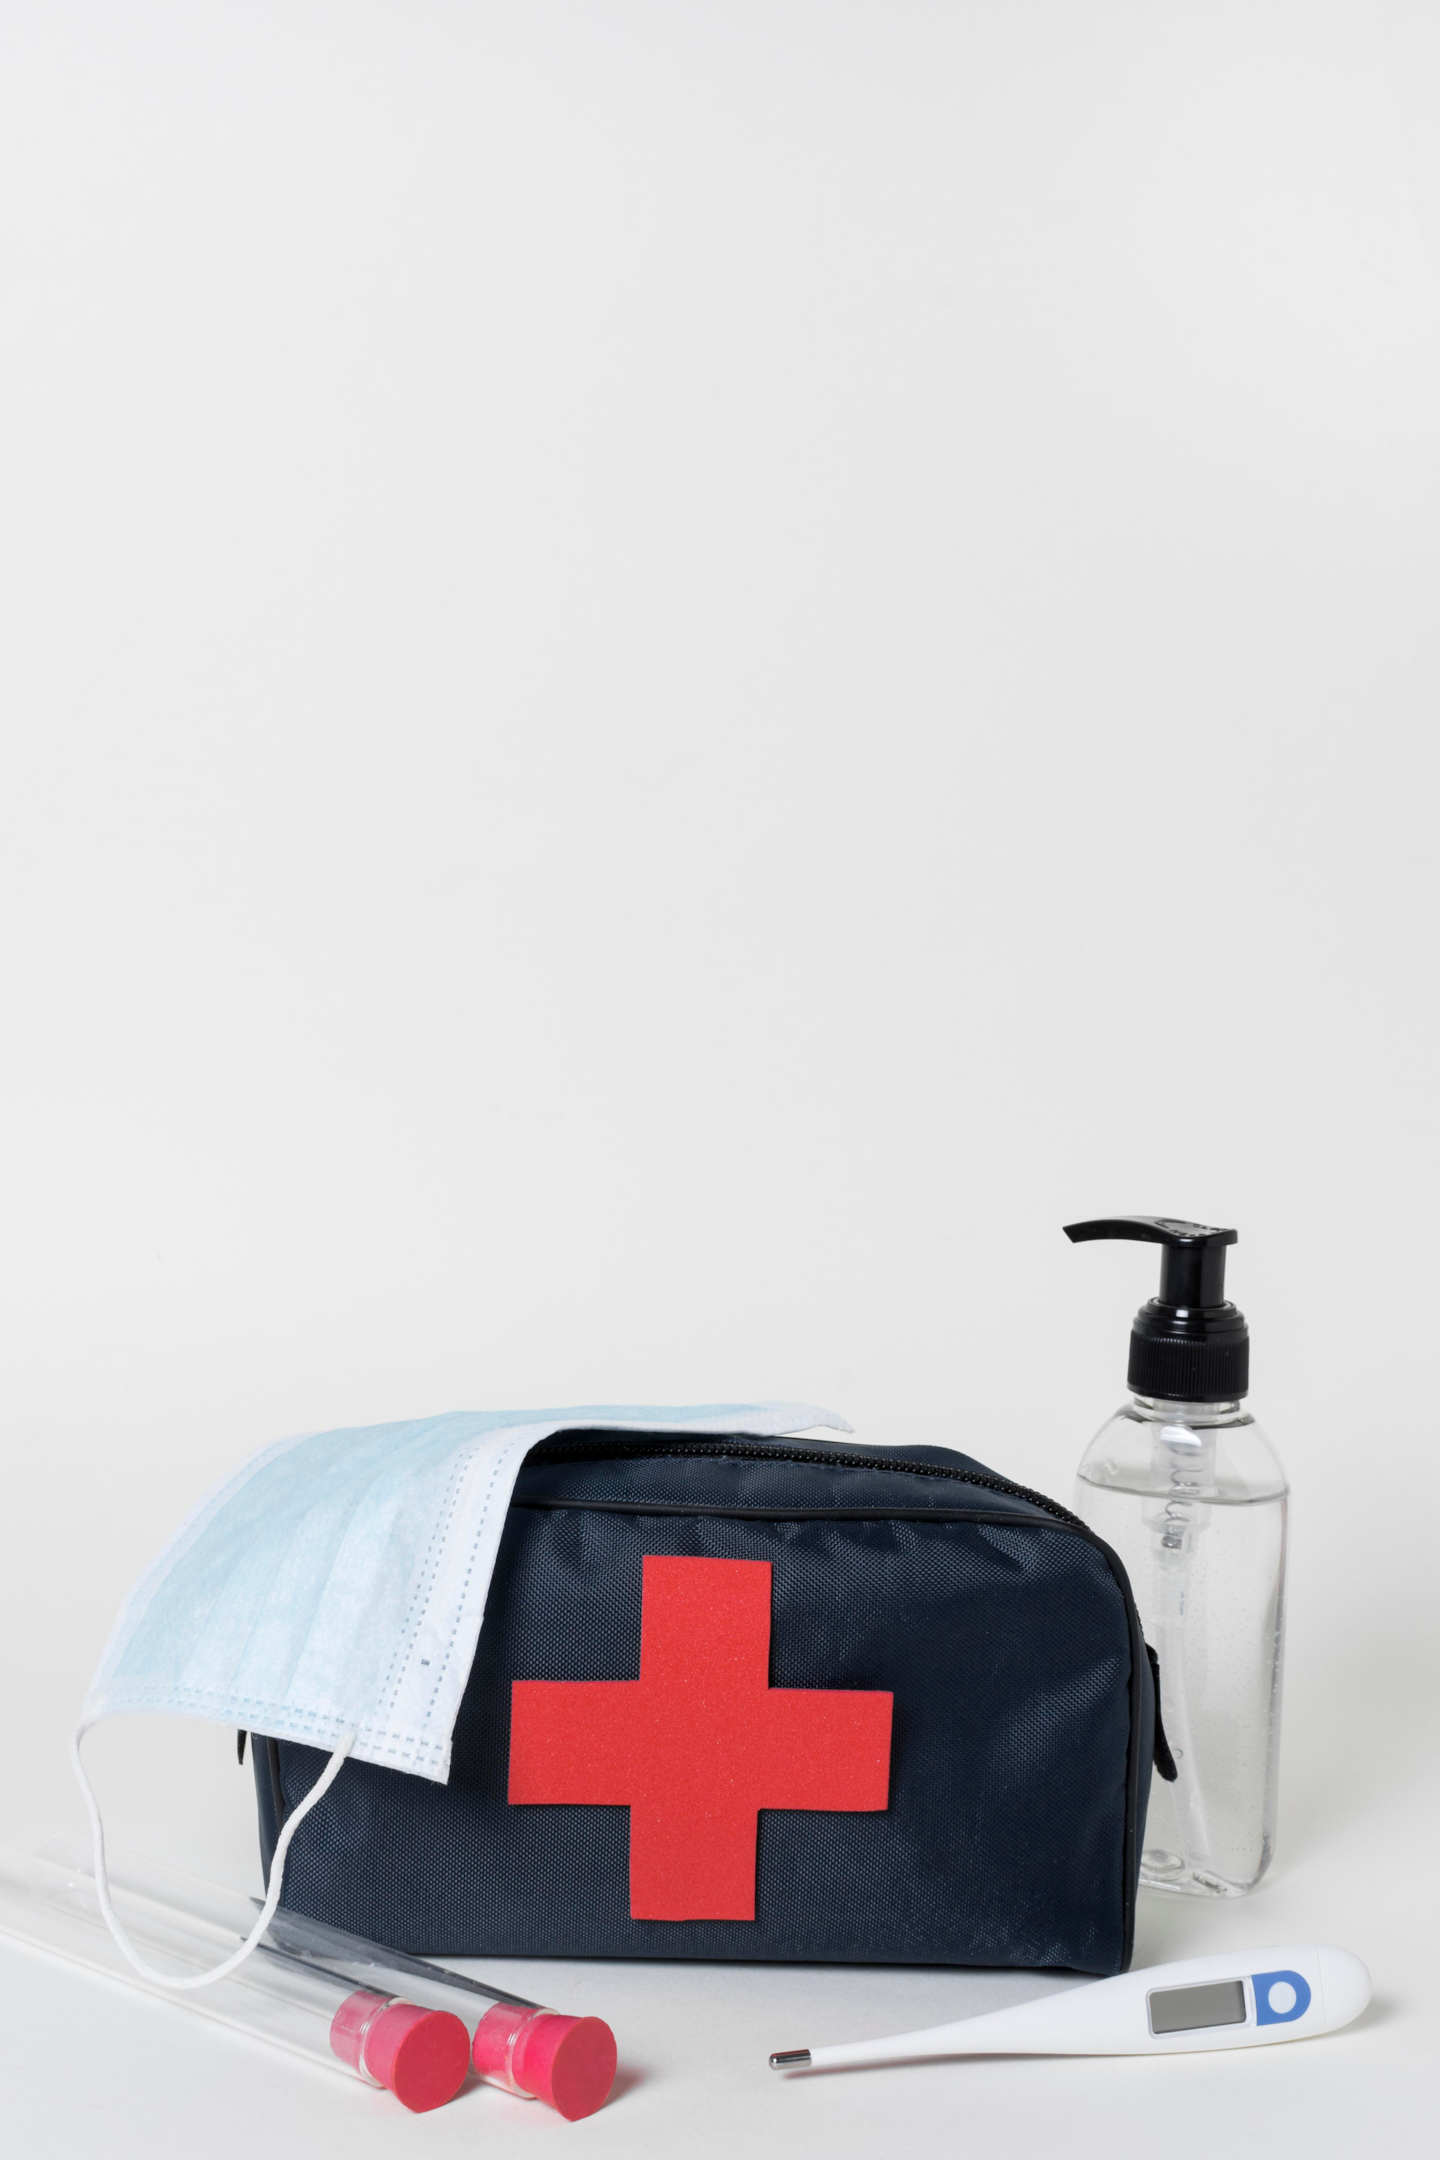 First Aid and Safety Items for Car Emergency Kit - Essential Supplies